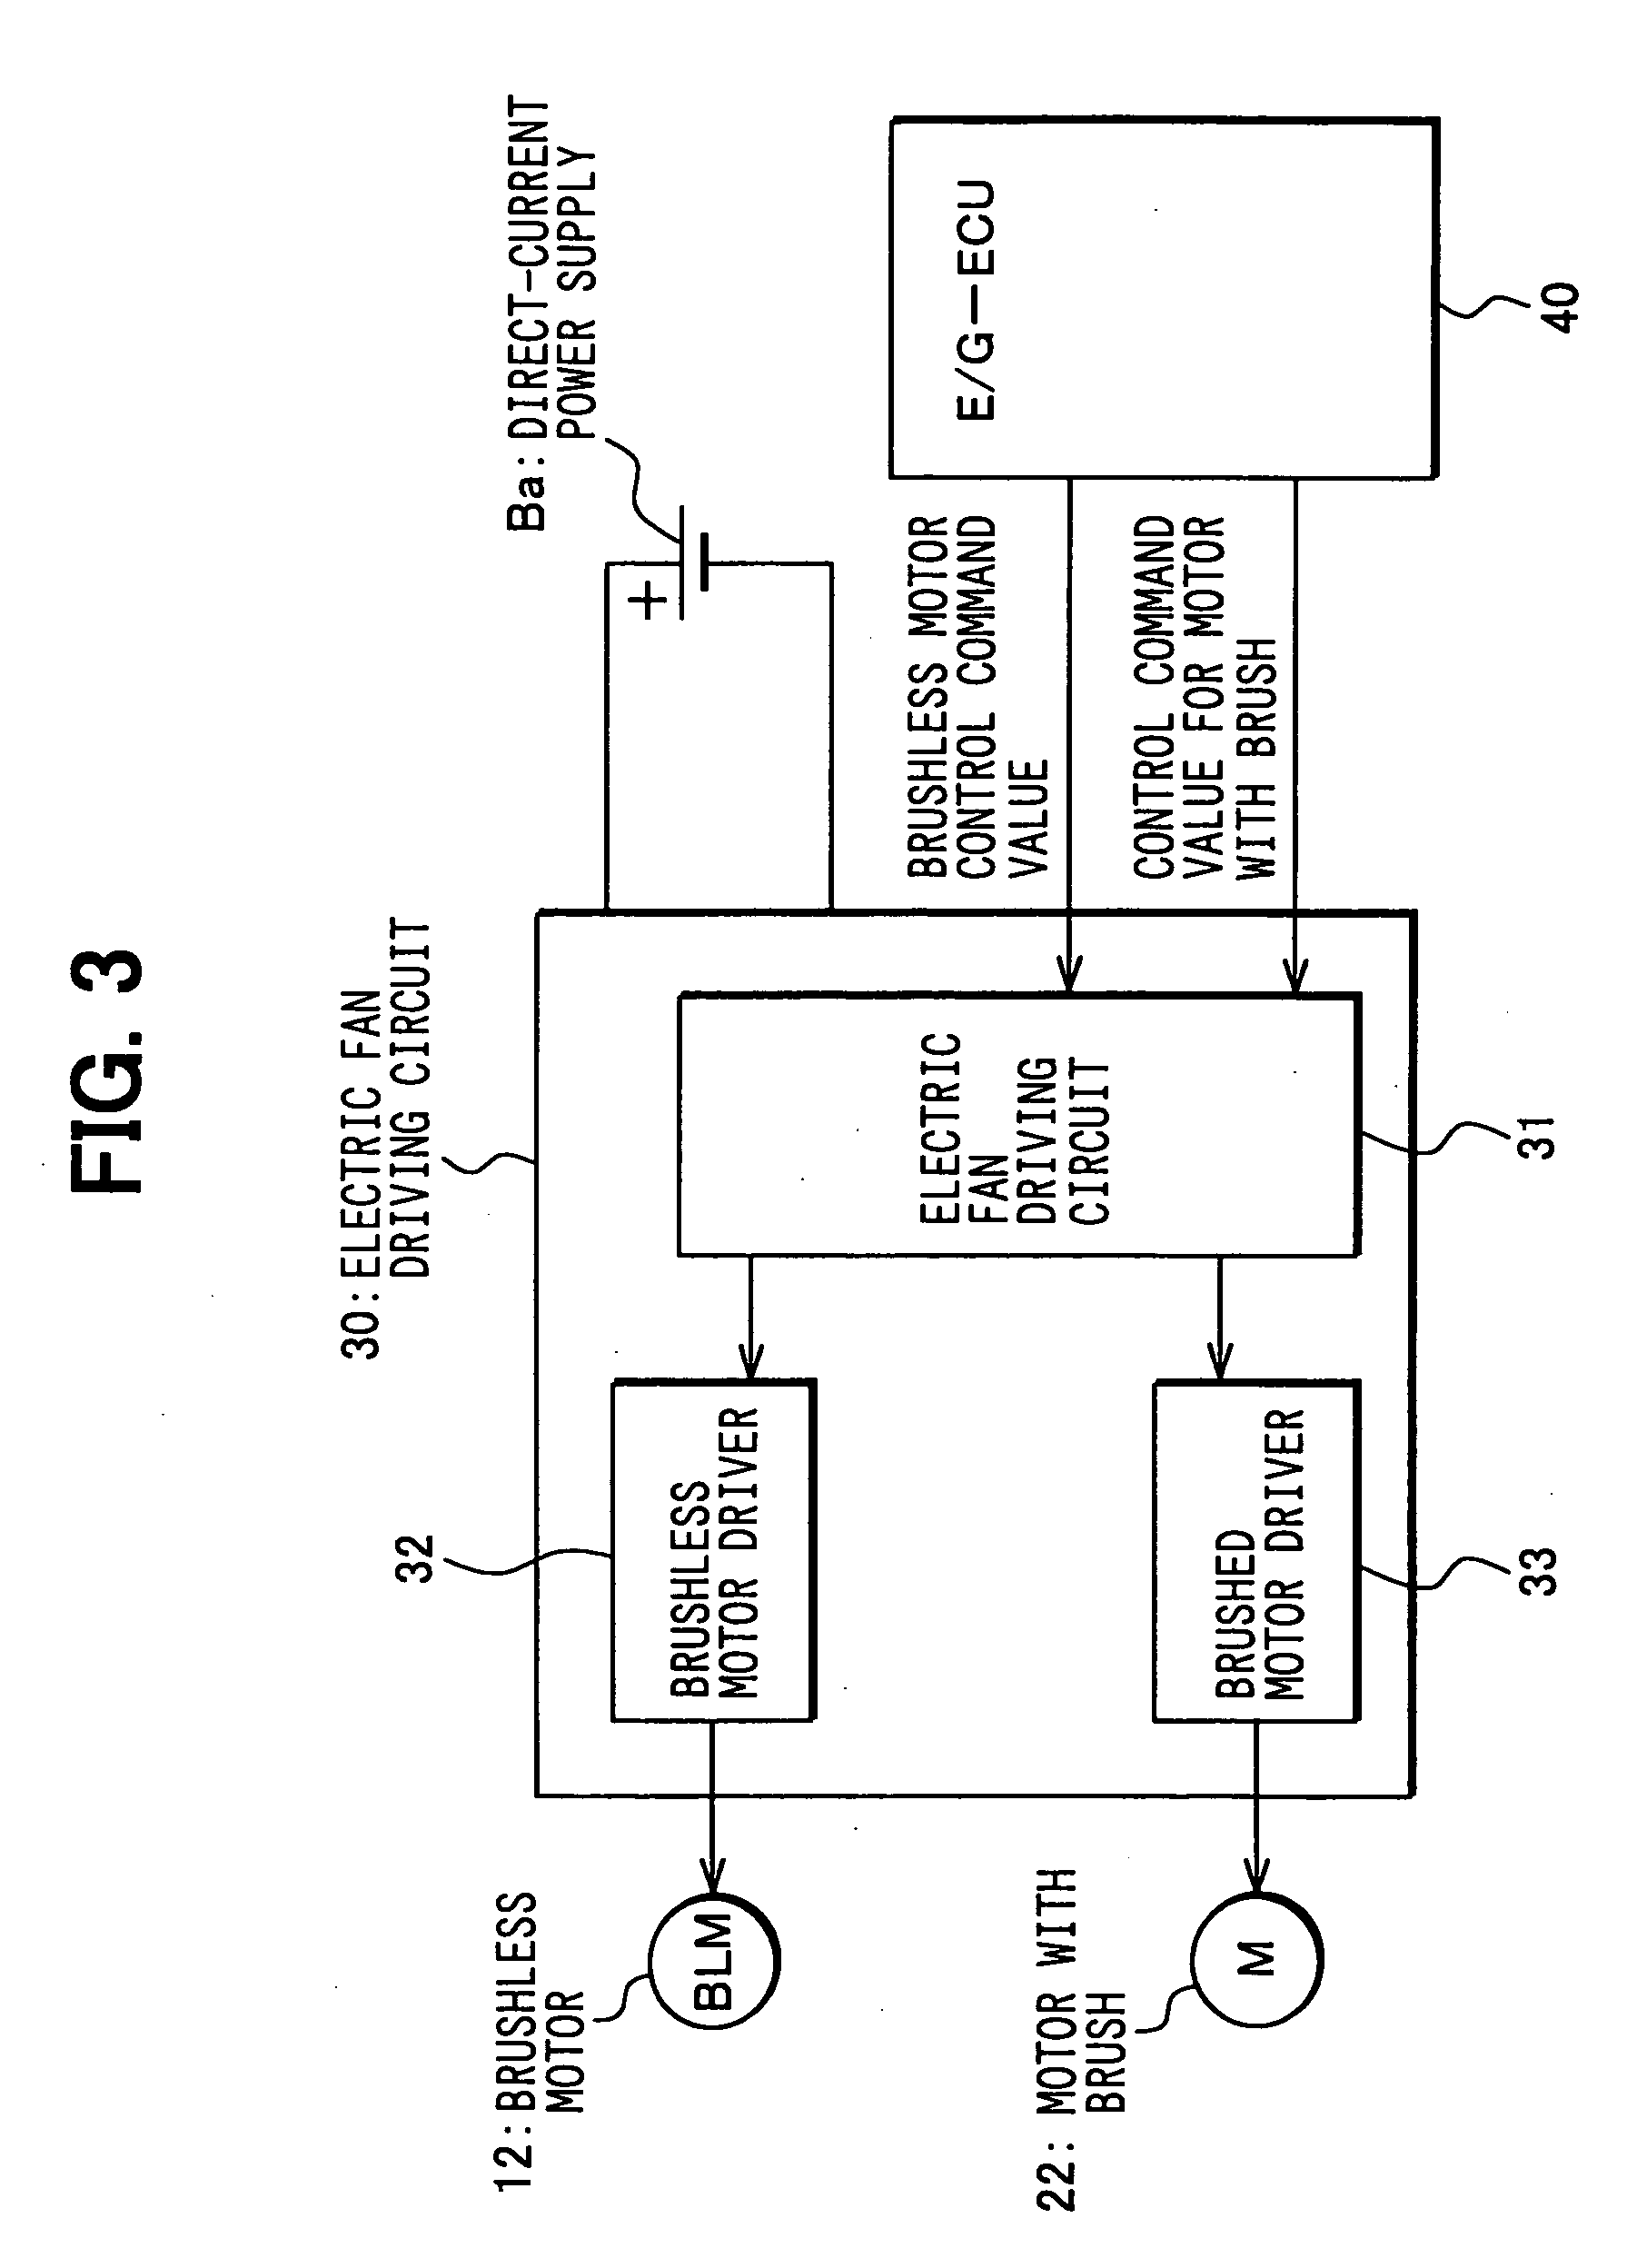 Electrical fan system for vehicle